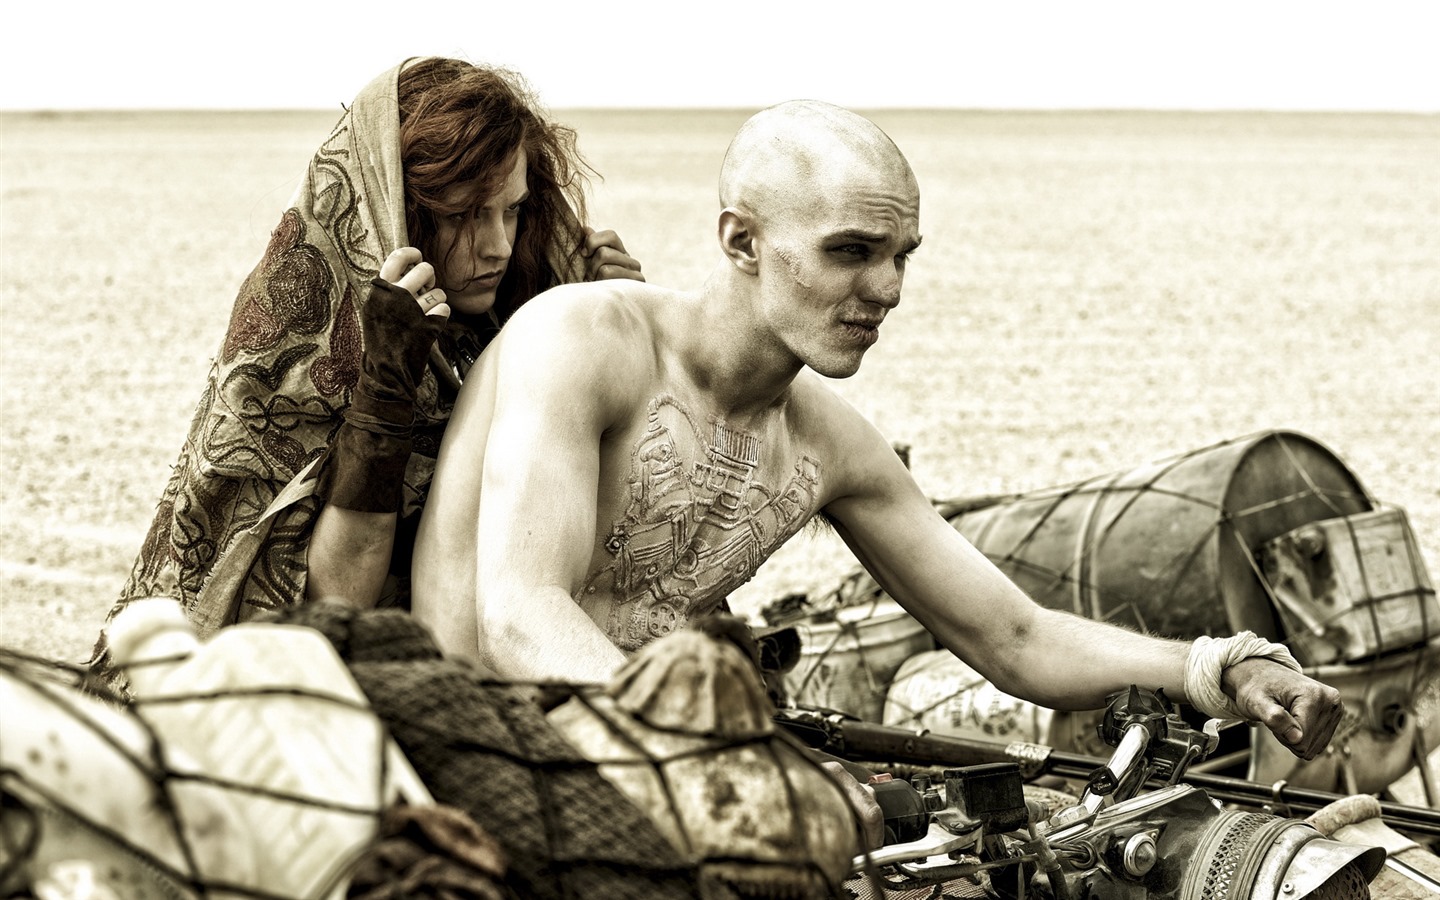 Mad Max: Fury Road, HD movie wallpapers #13 - 1440x900